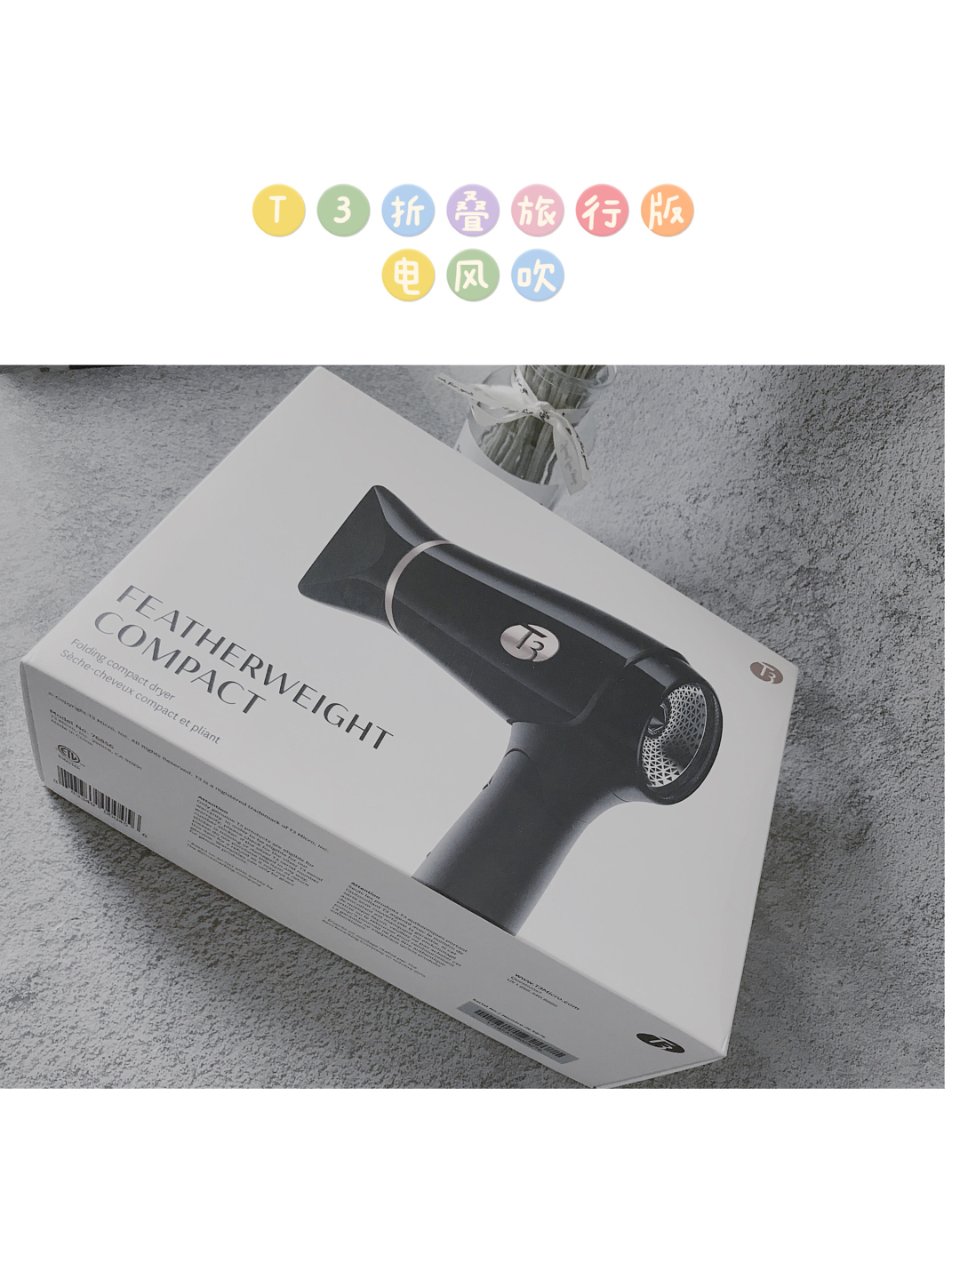 T3 Featherweight Compact Hairdryer - Bla